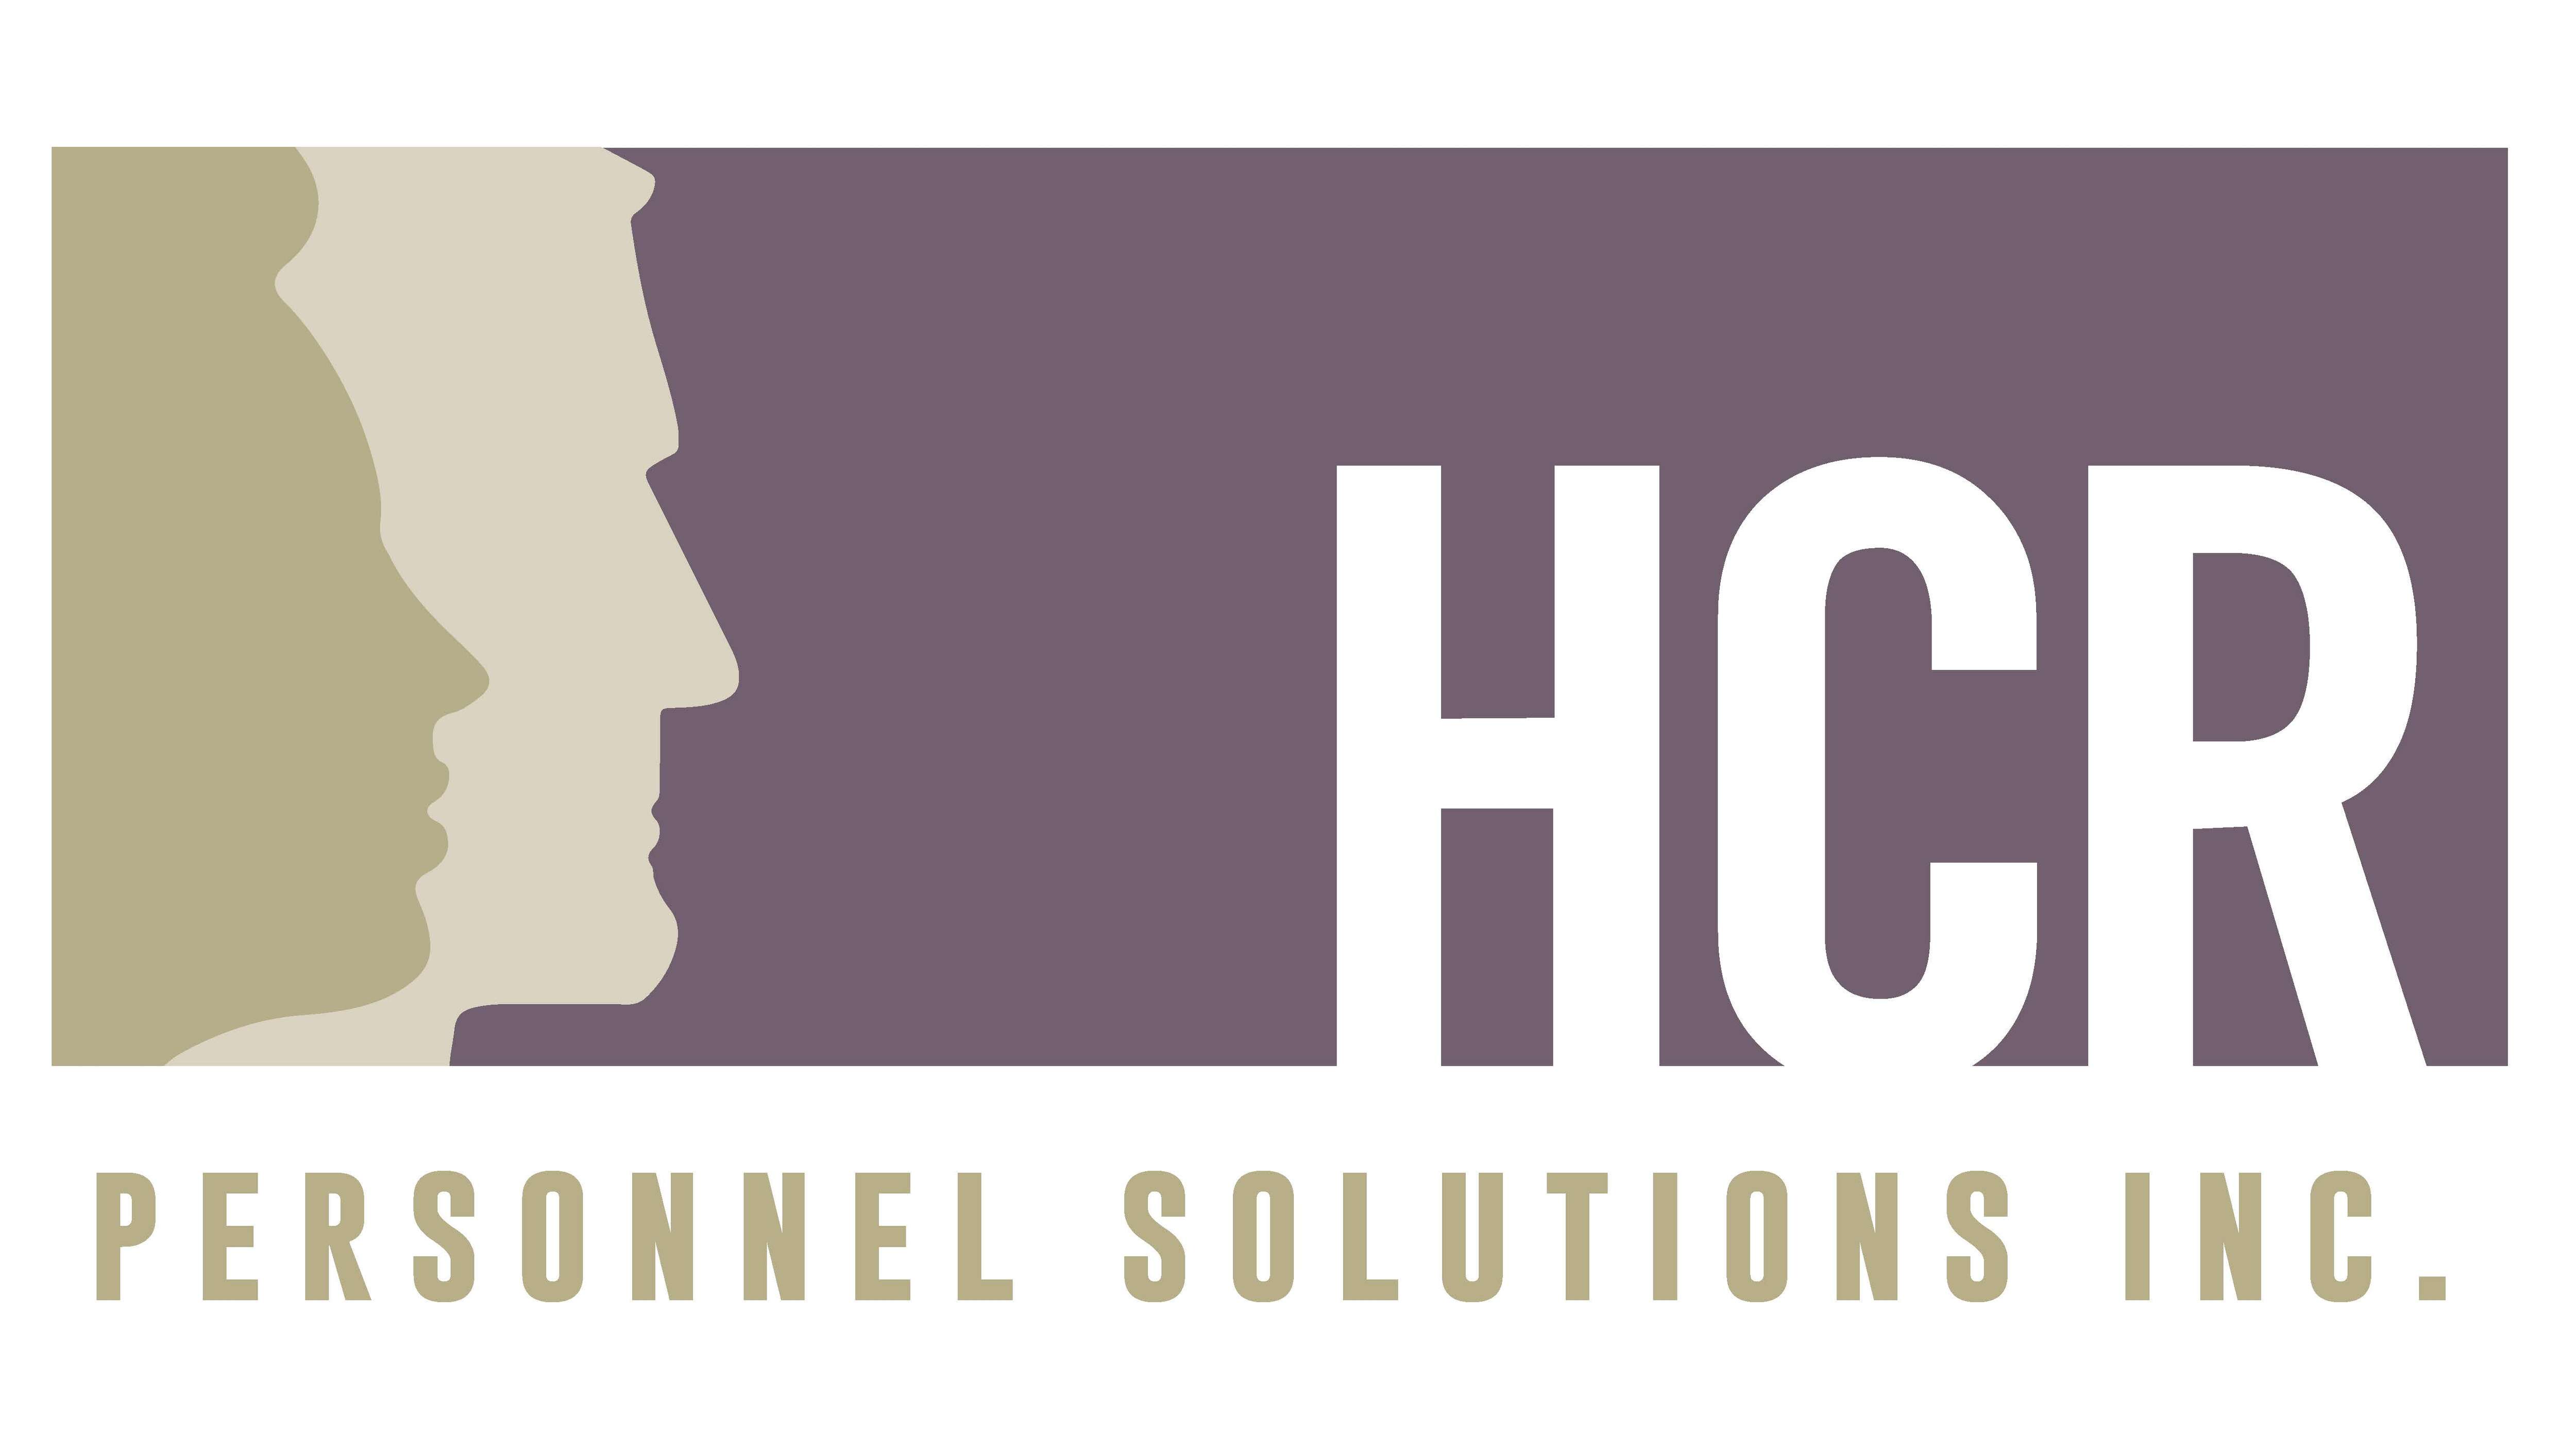 HCR Personnel Solutions Inc.